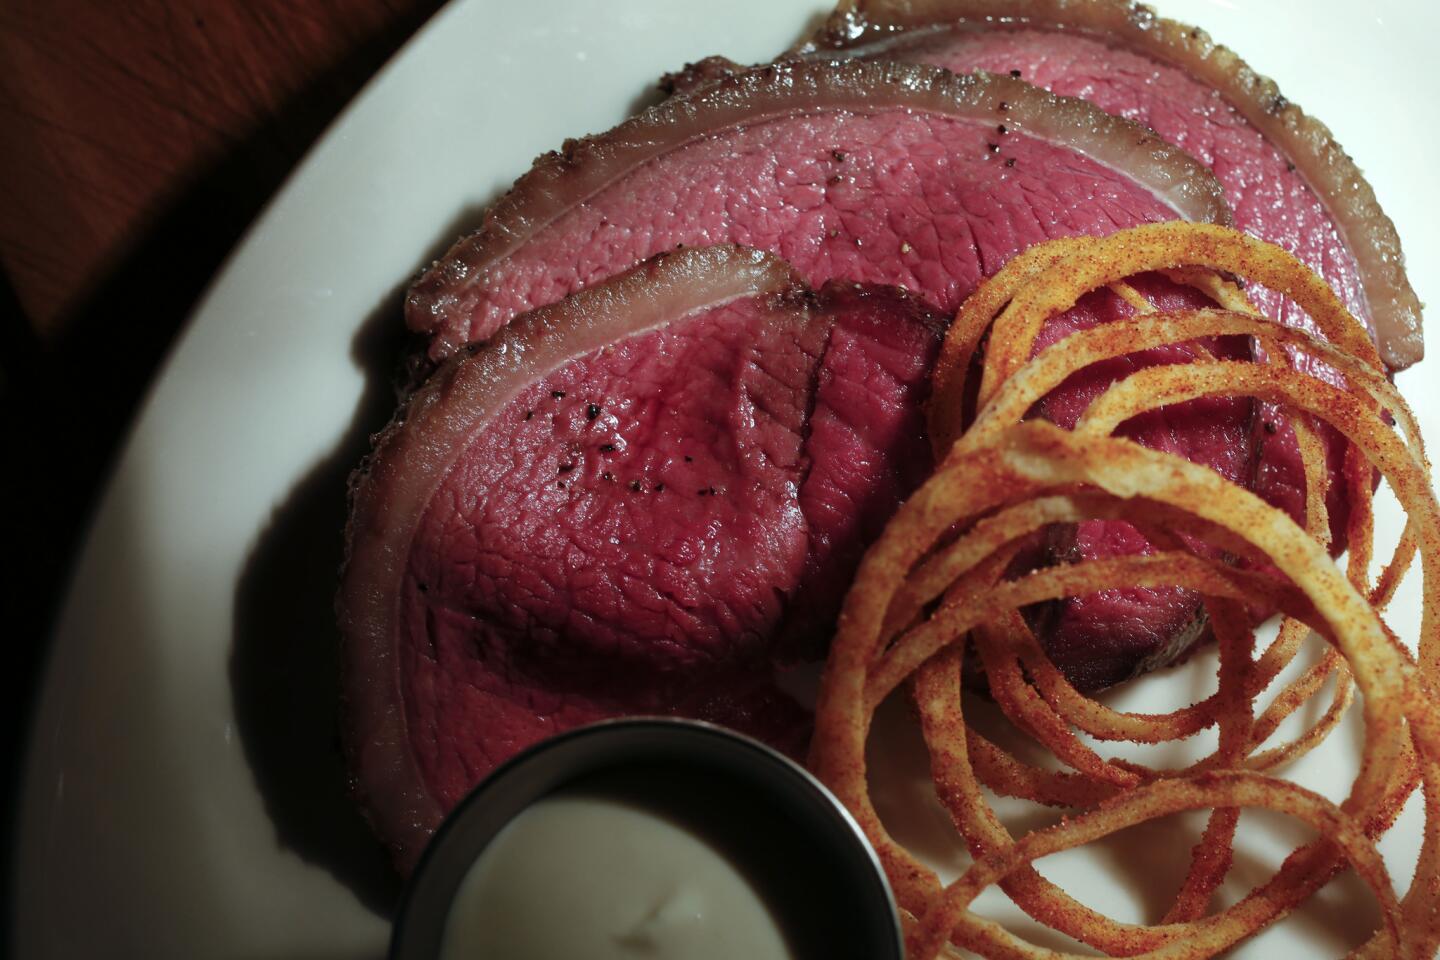 One of Odys + Penelope's specialties is a dry-aged sirloin cap served with crispy onions and a horseradish cream. More great L.A.-area restaurants: Jonathan Gold’s 101